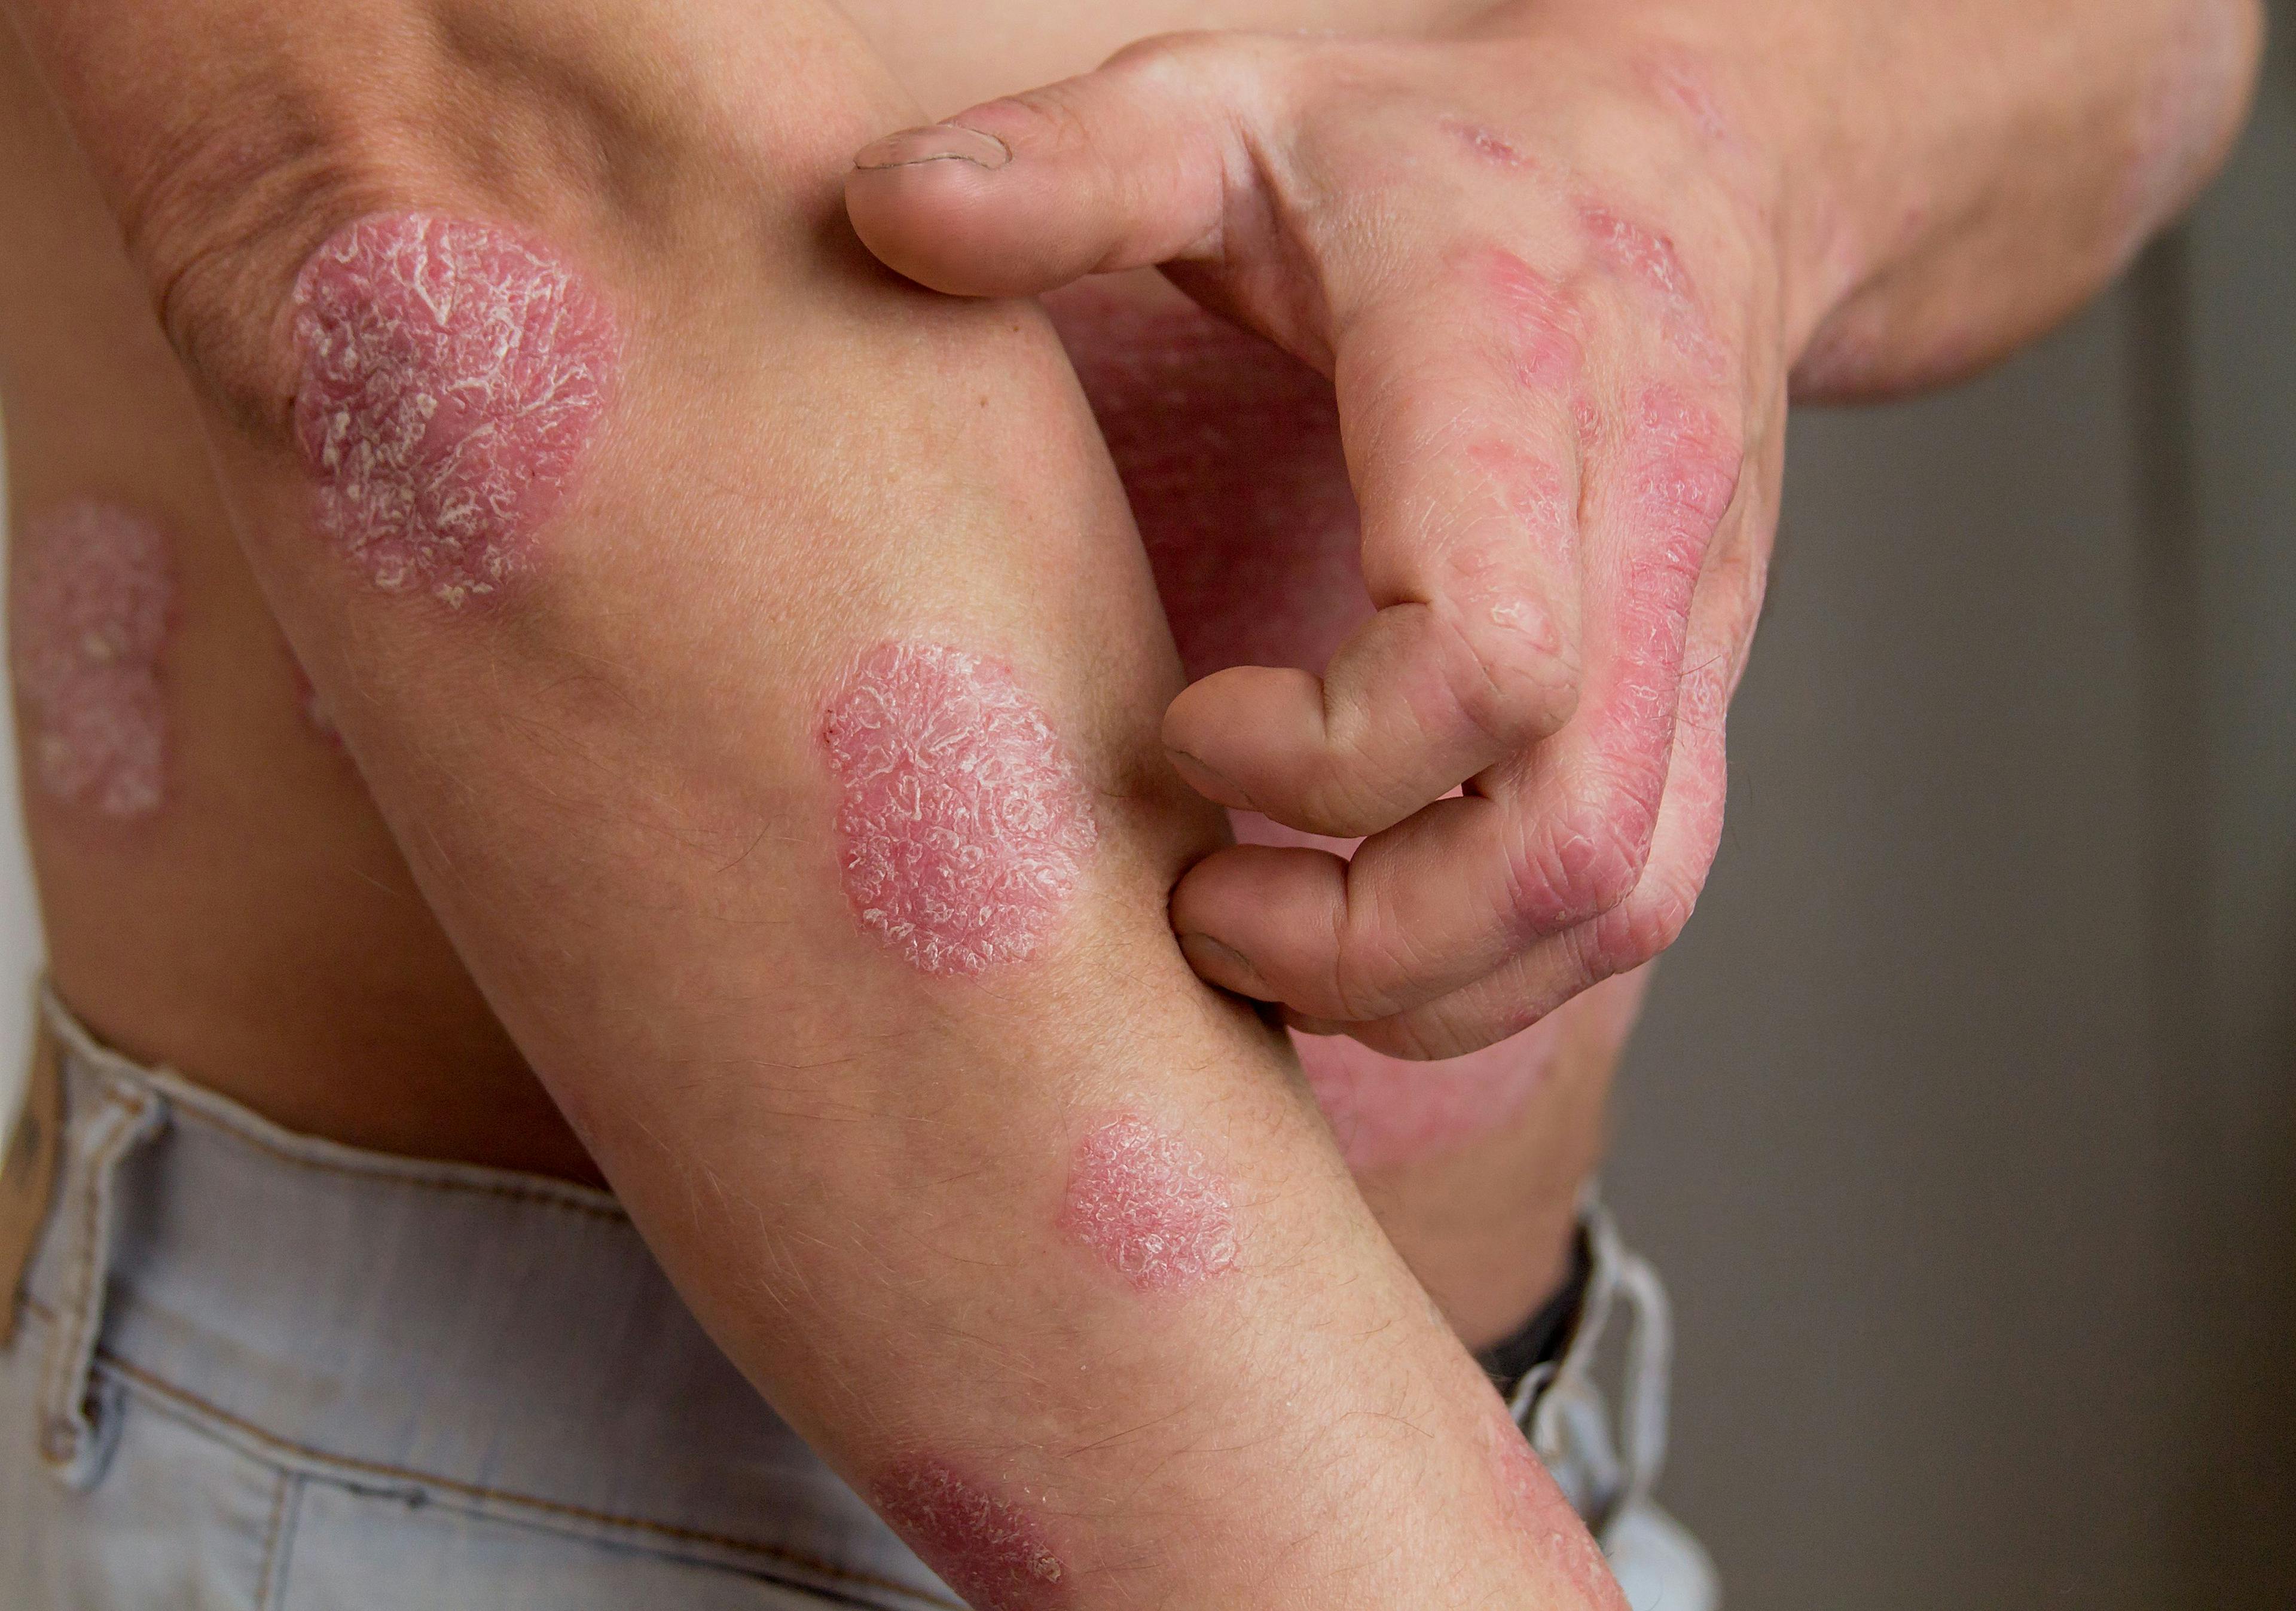 Psoriasis Linked to Greater Chance of Developing Psoriatic Arthritis